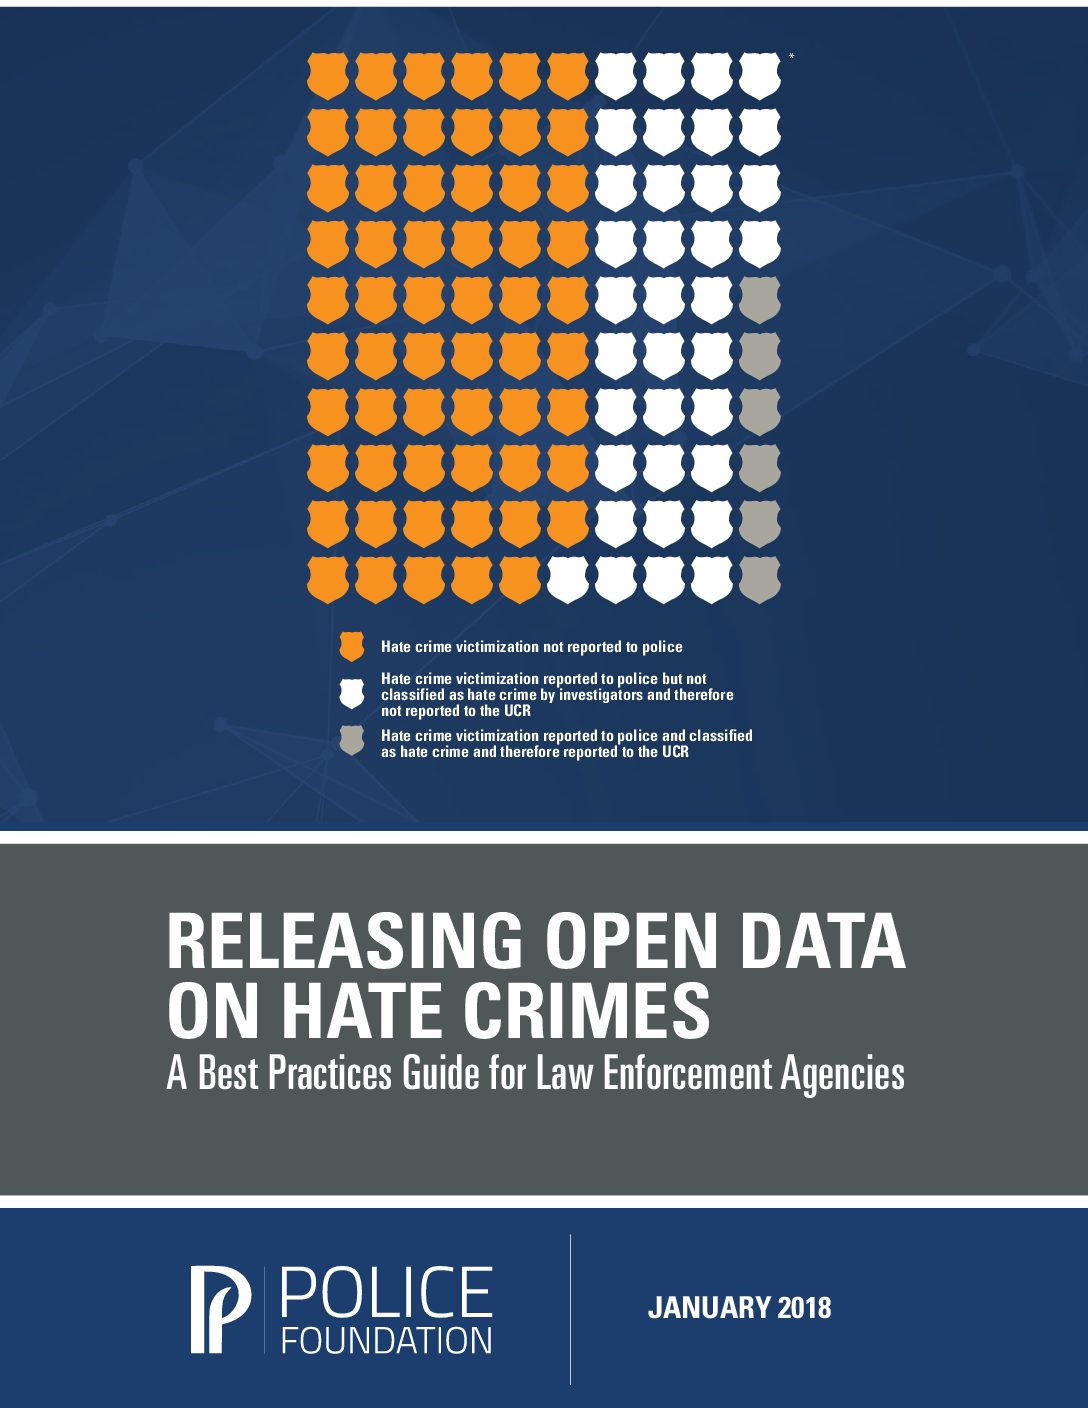 Releasing Open Data on Hate Crimes-Best Practices Guide